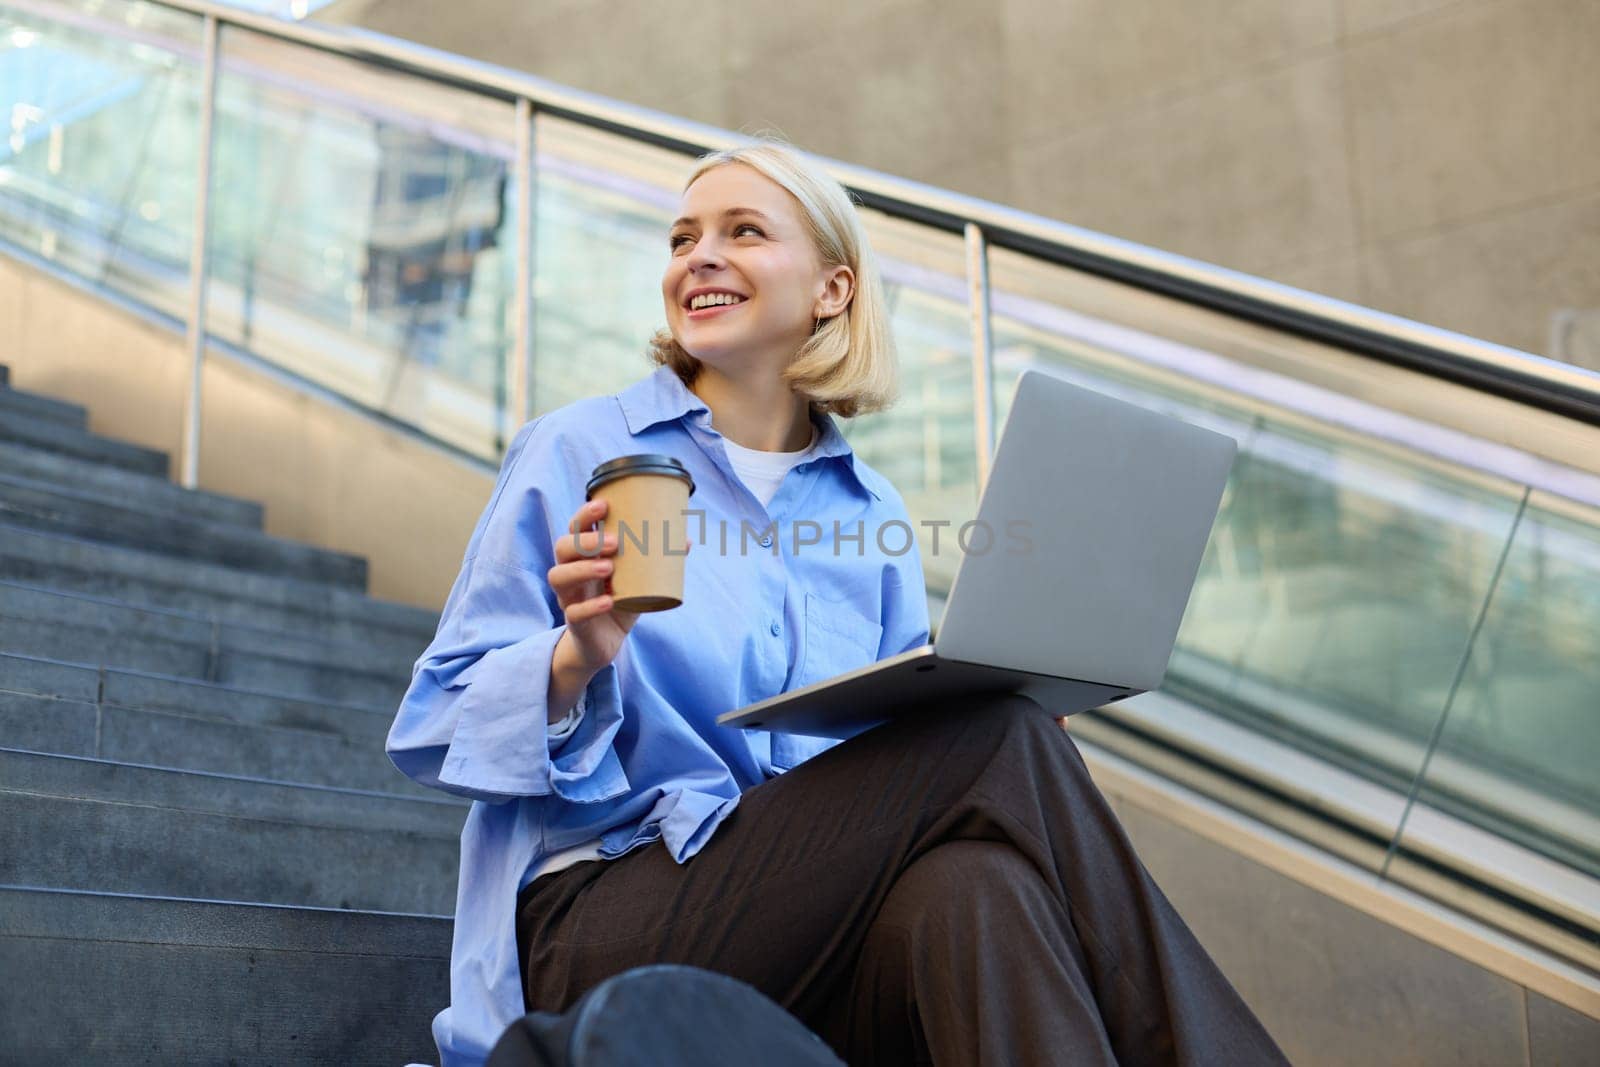 Young woman, student in blue shirt, working on laptop, sitting outdoors on street stairs, working on project online, connects to public wifi, elearning.